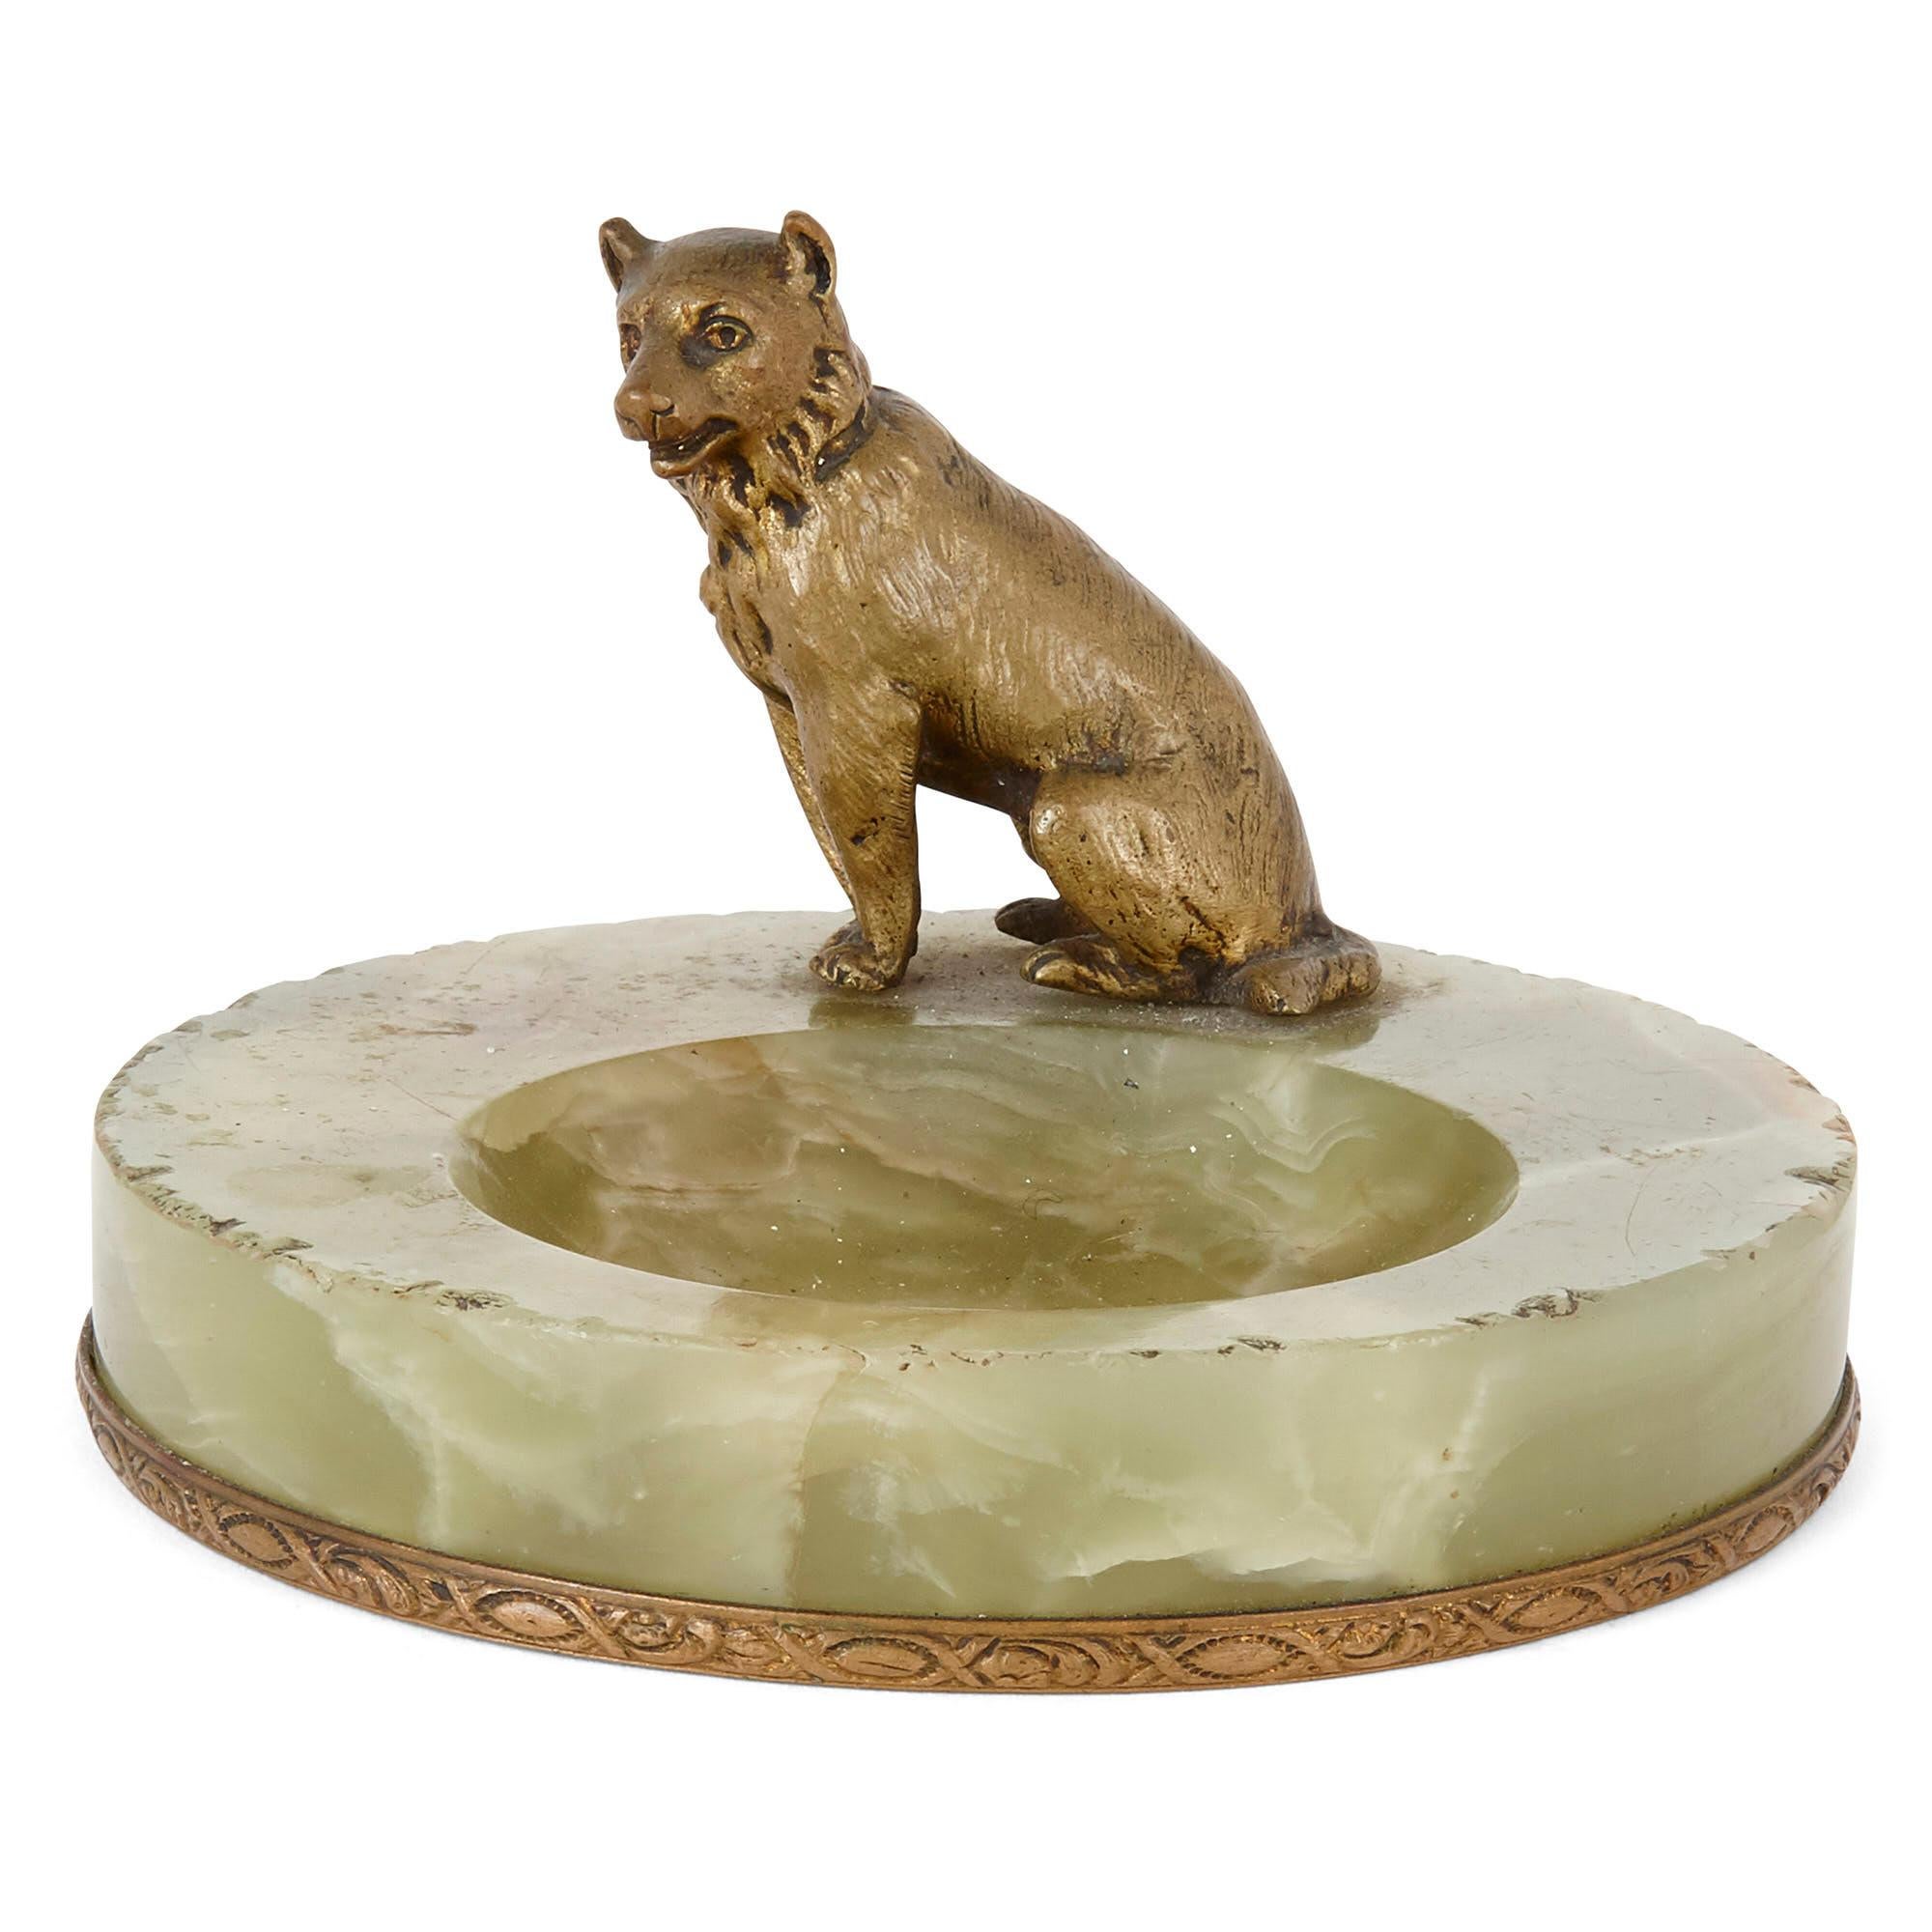 Eclectic group of five antique dog-form objects
Continental, circa 1900
Measures: Largest: 16cm, diameter 12cm
Smallest: Height 4cm, diameter 6cm

This wonderful little collection of dog themed items is comprised of five pieces, a porcelain